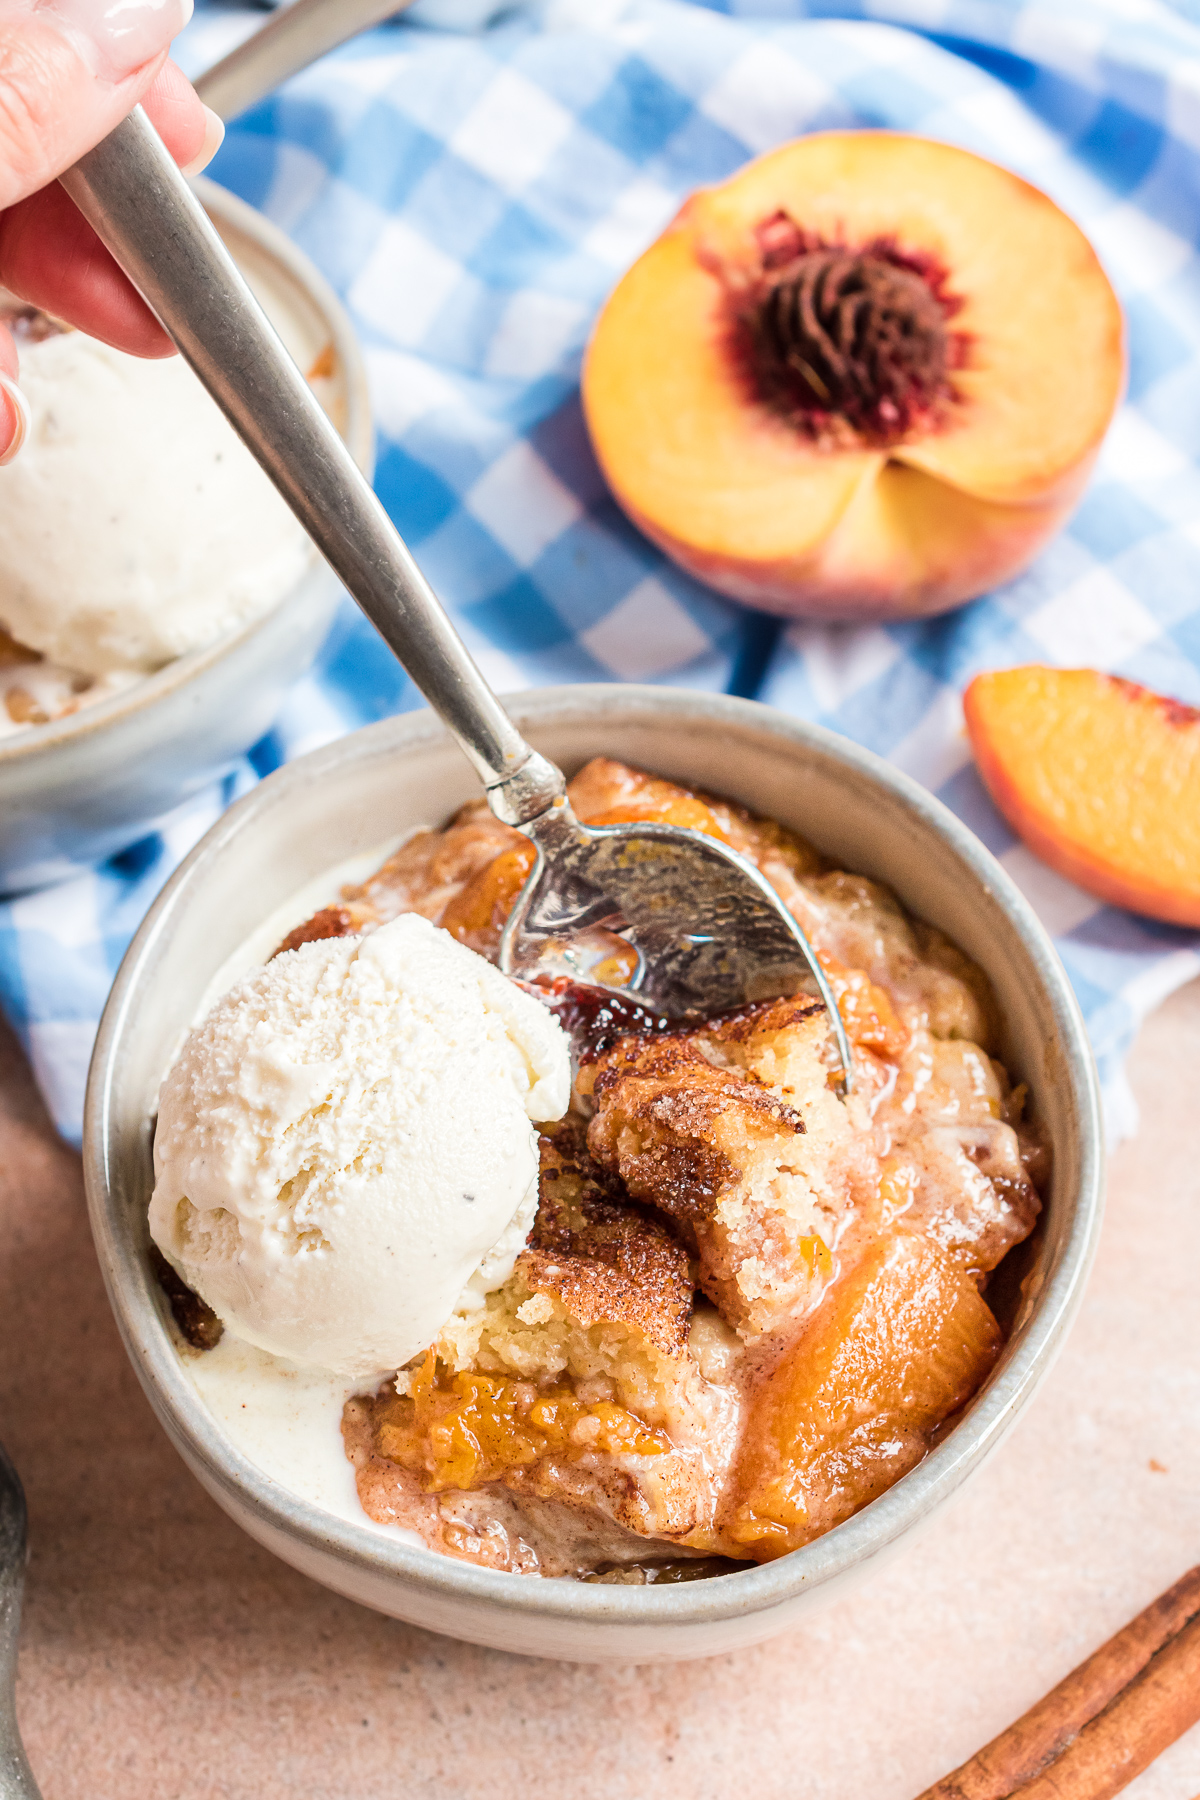 A bowl of peach cobbler with a large scoop of vanilla ice cream on top.